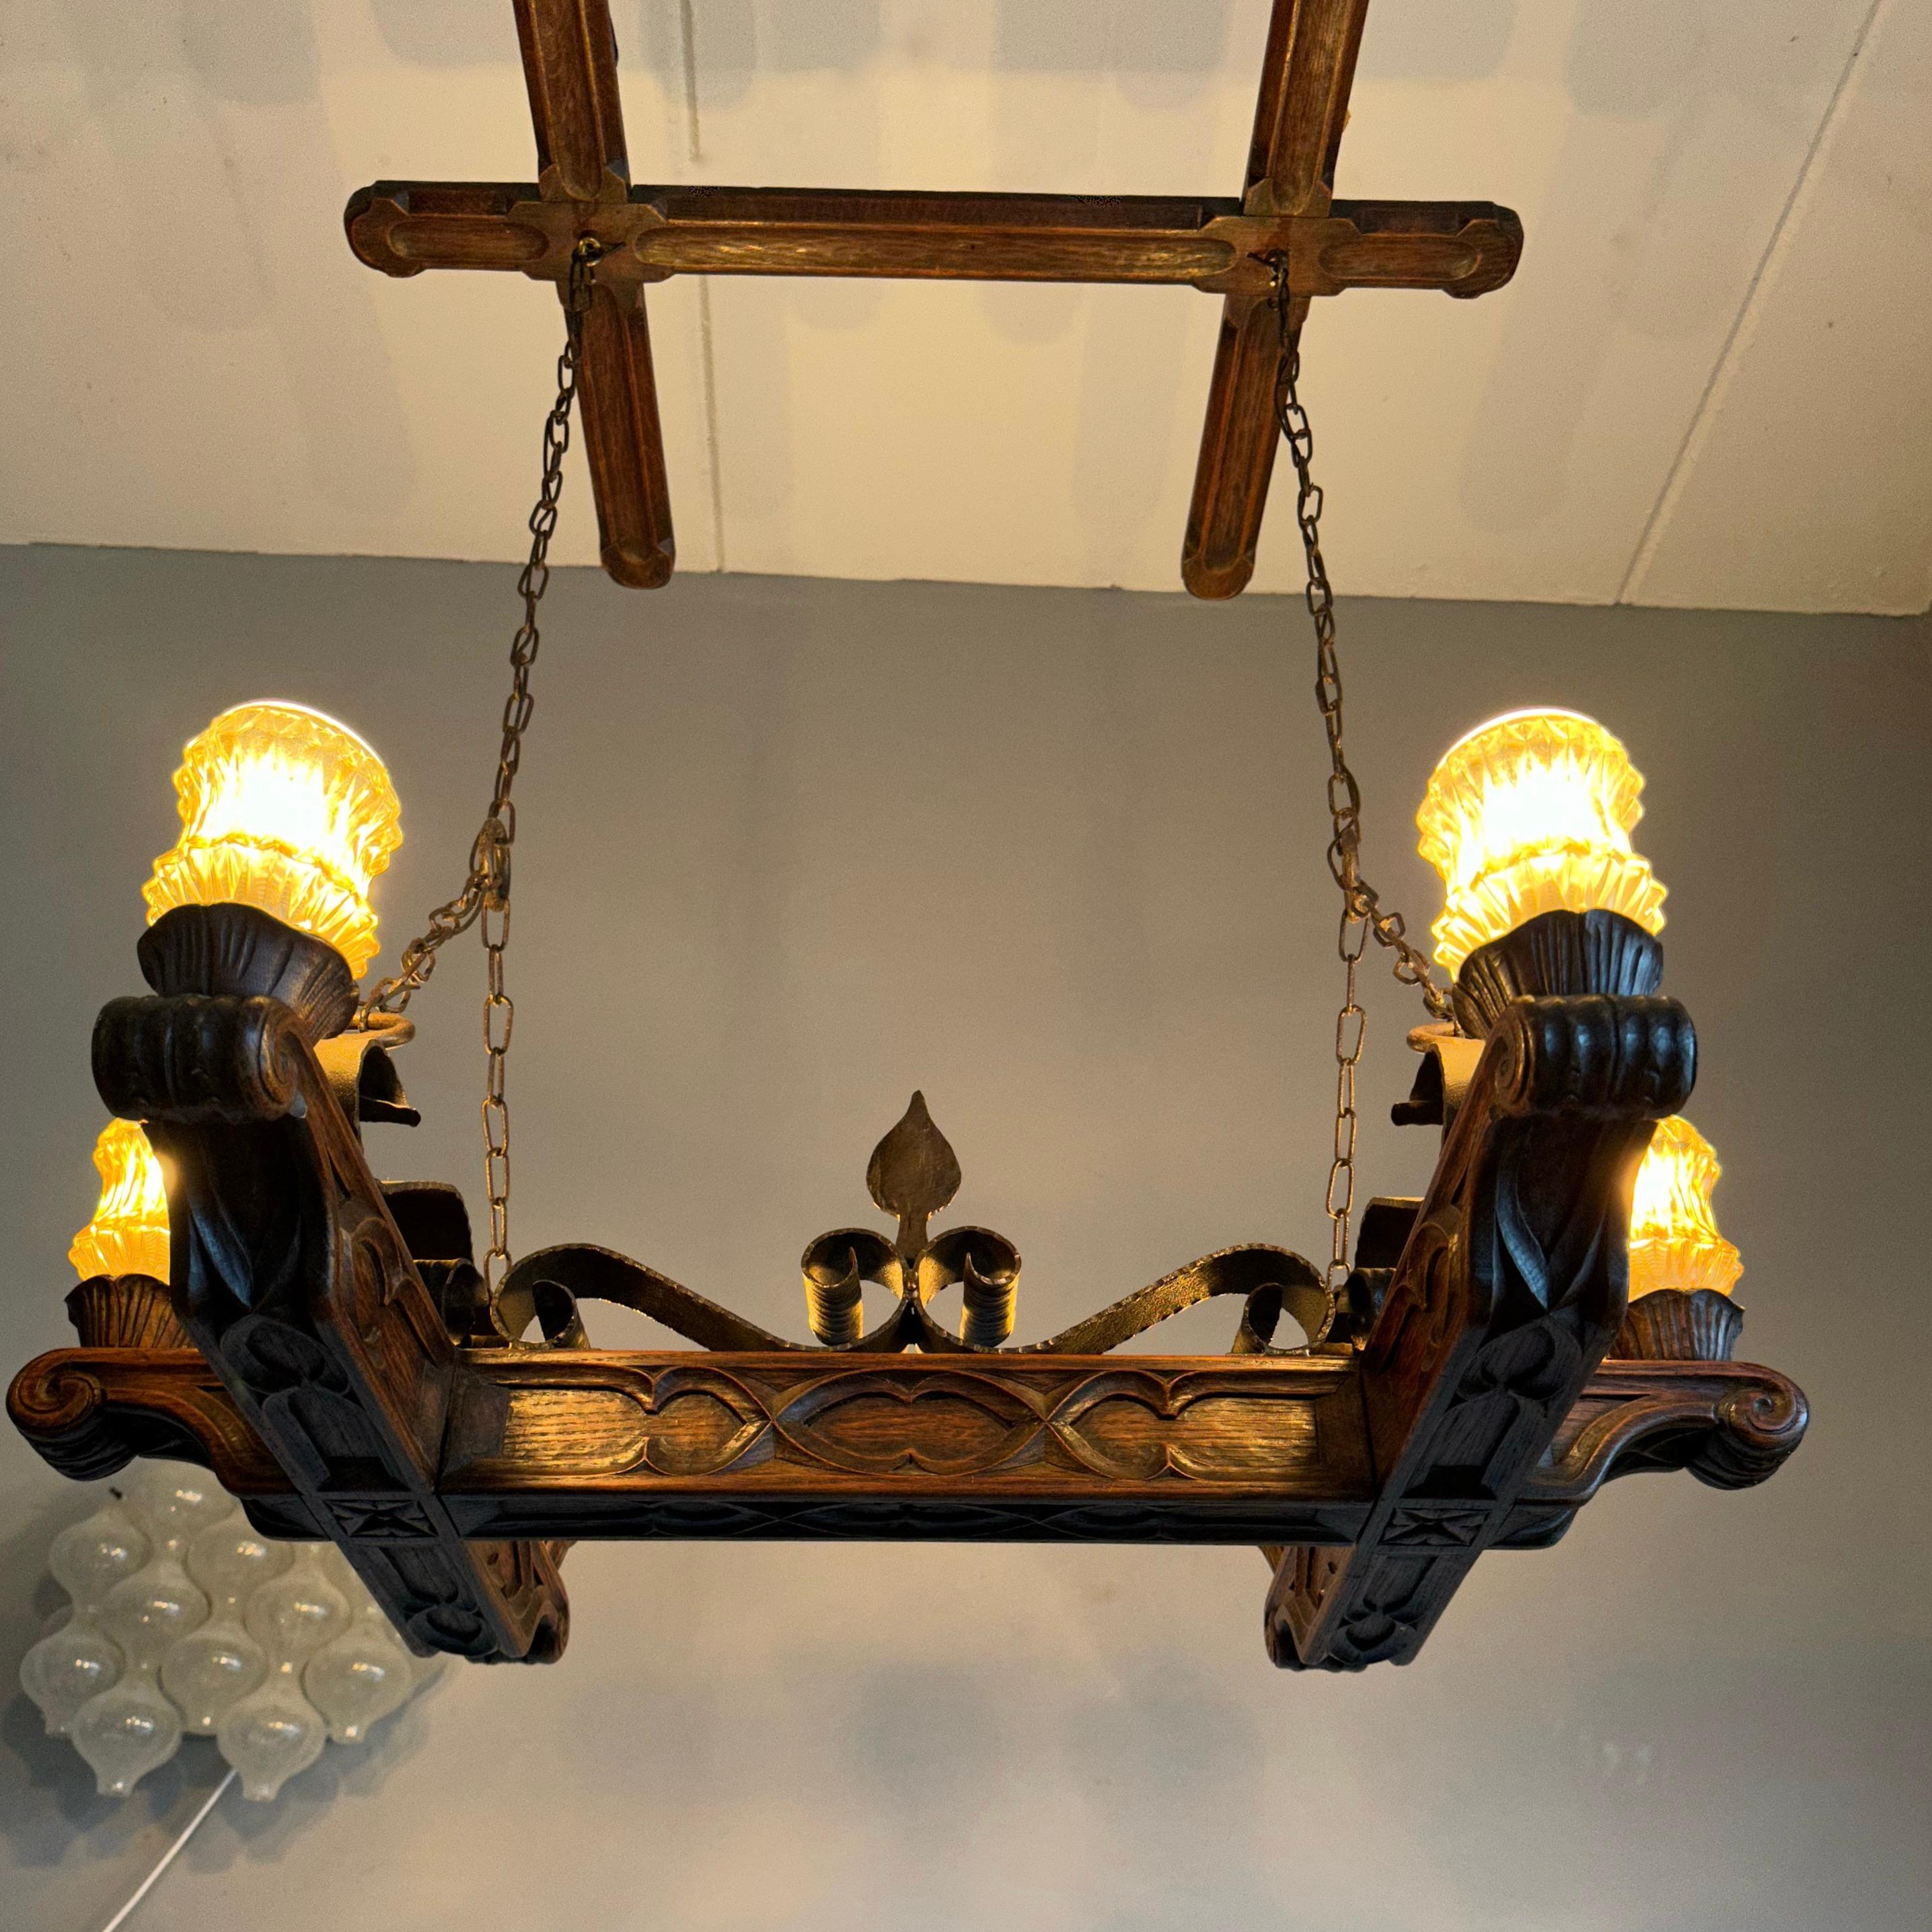 Large size and excellent quality, solid oak Gothic Revival light fixture. 

If you have visited Gothic churches then you may have immediately recognized some of the wonderful design elements of this Gothic chandelier. This all handcrafted and